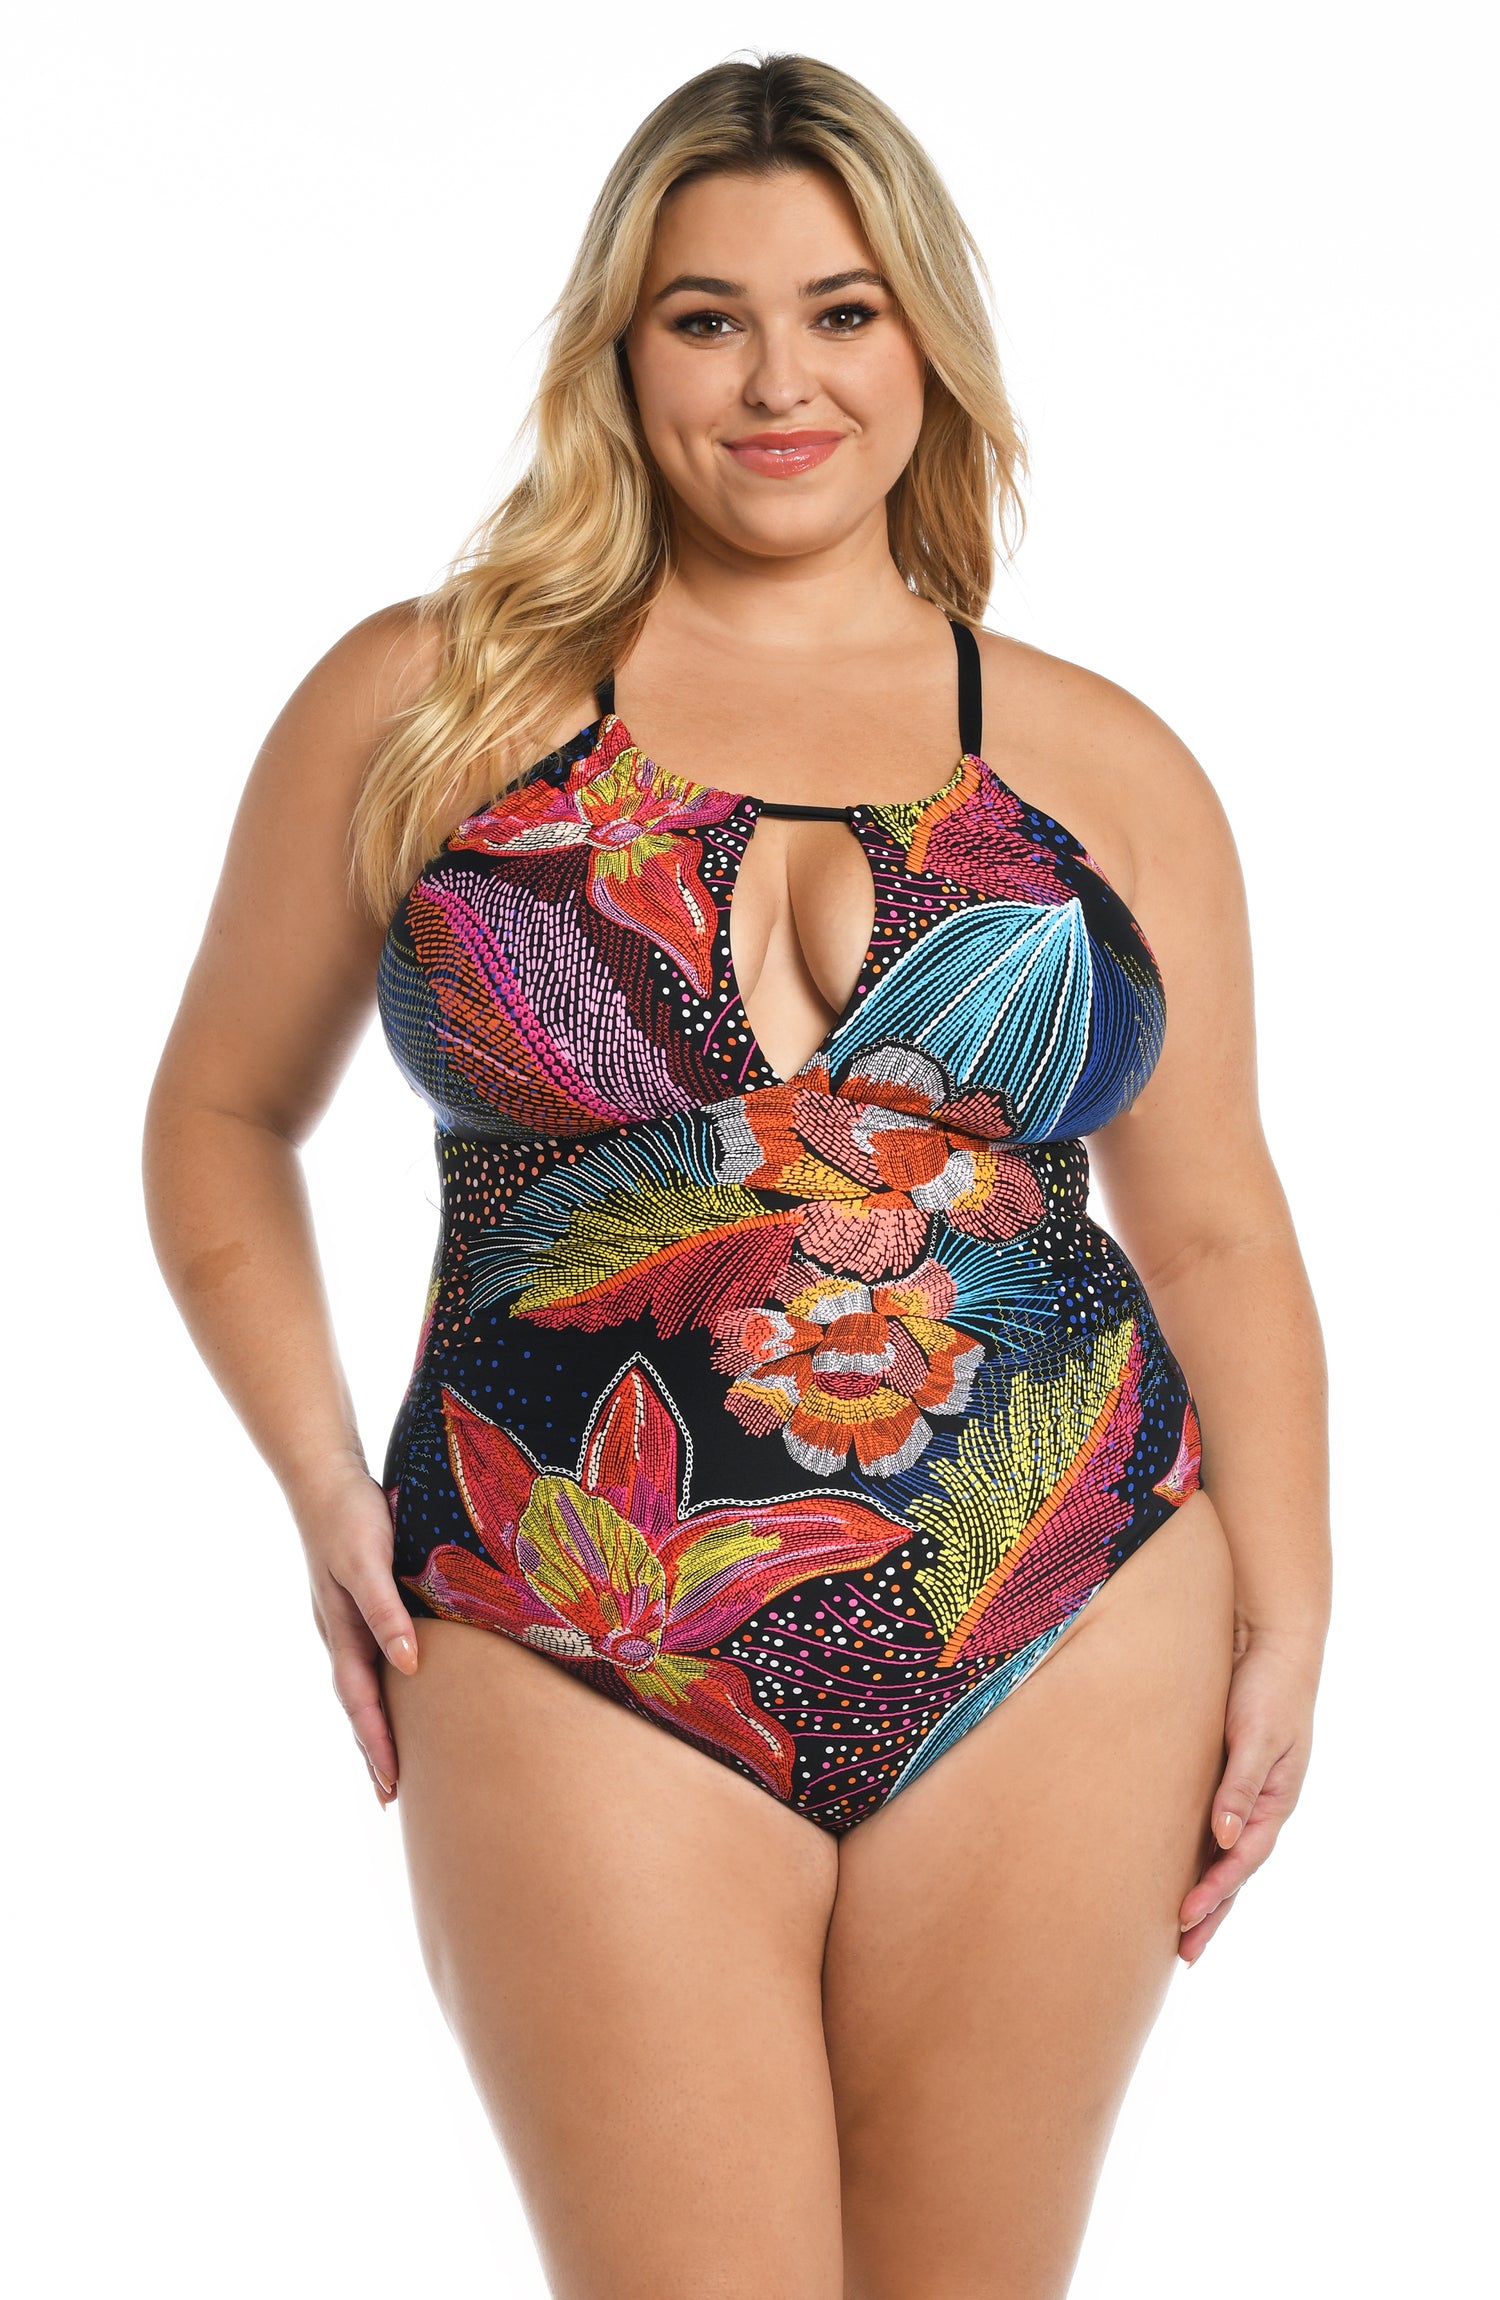 Model is wearing a shiny multicolored tropical printed high neck one piece from our Sunlit Soriee collection!